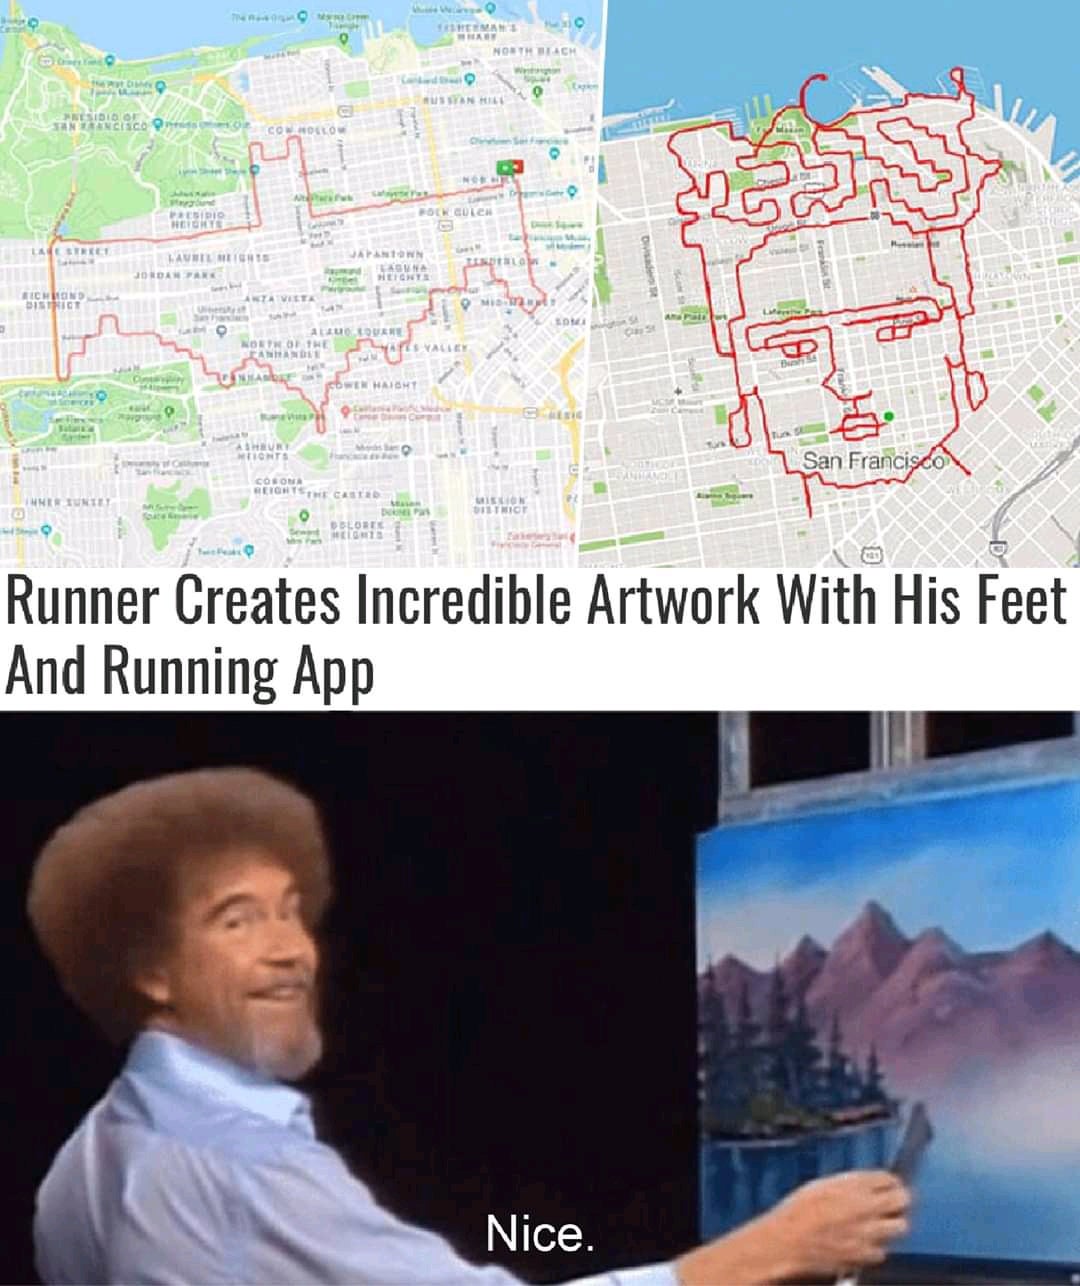 Bob Ross Approved.